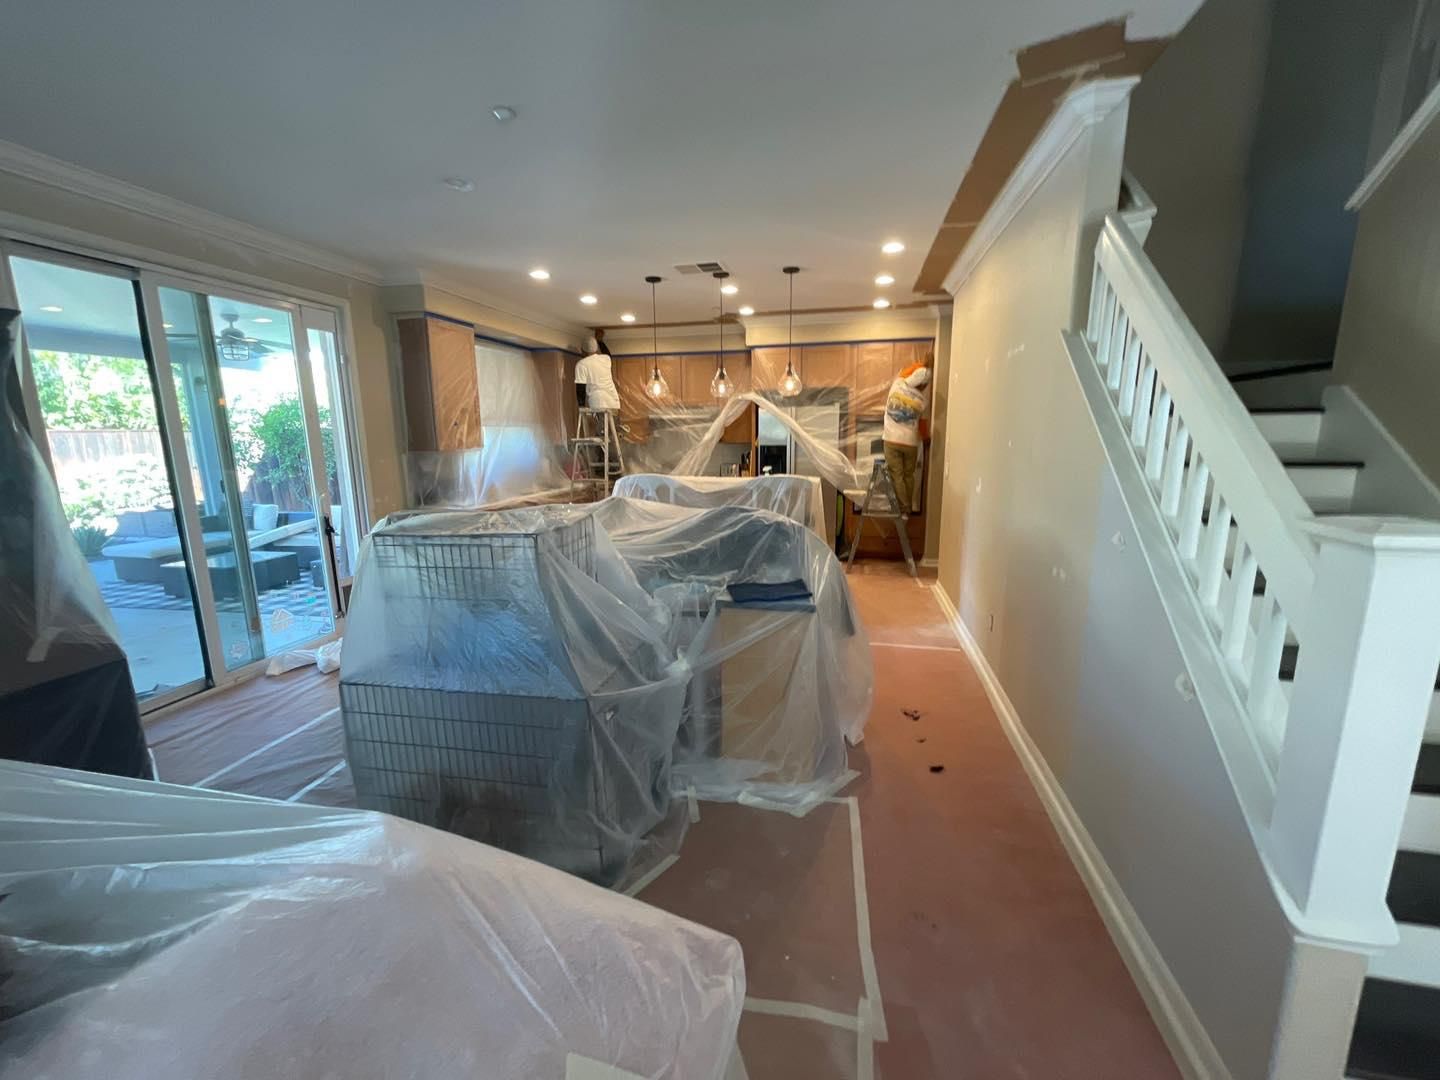 Misc. Content for Ready Repaint in Brentwood, CA